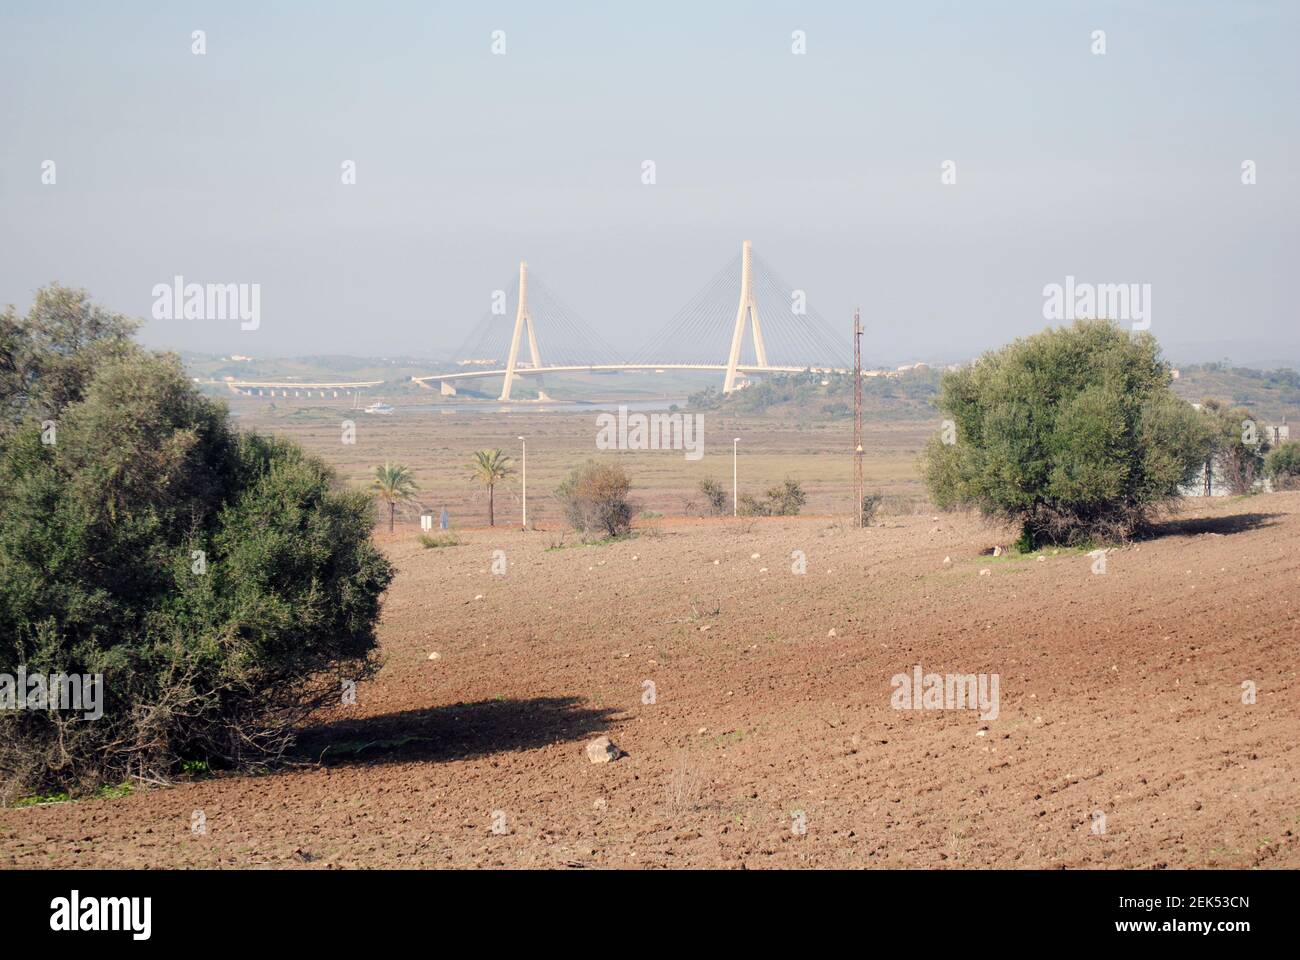 The Guadiana International Bridge between Portugal and Spain viewed from the Spainsh side. Stock Photo